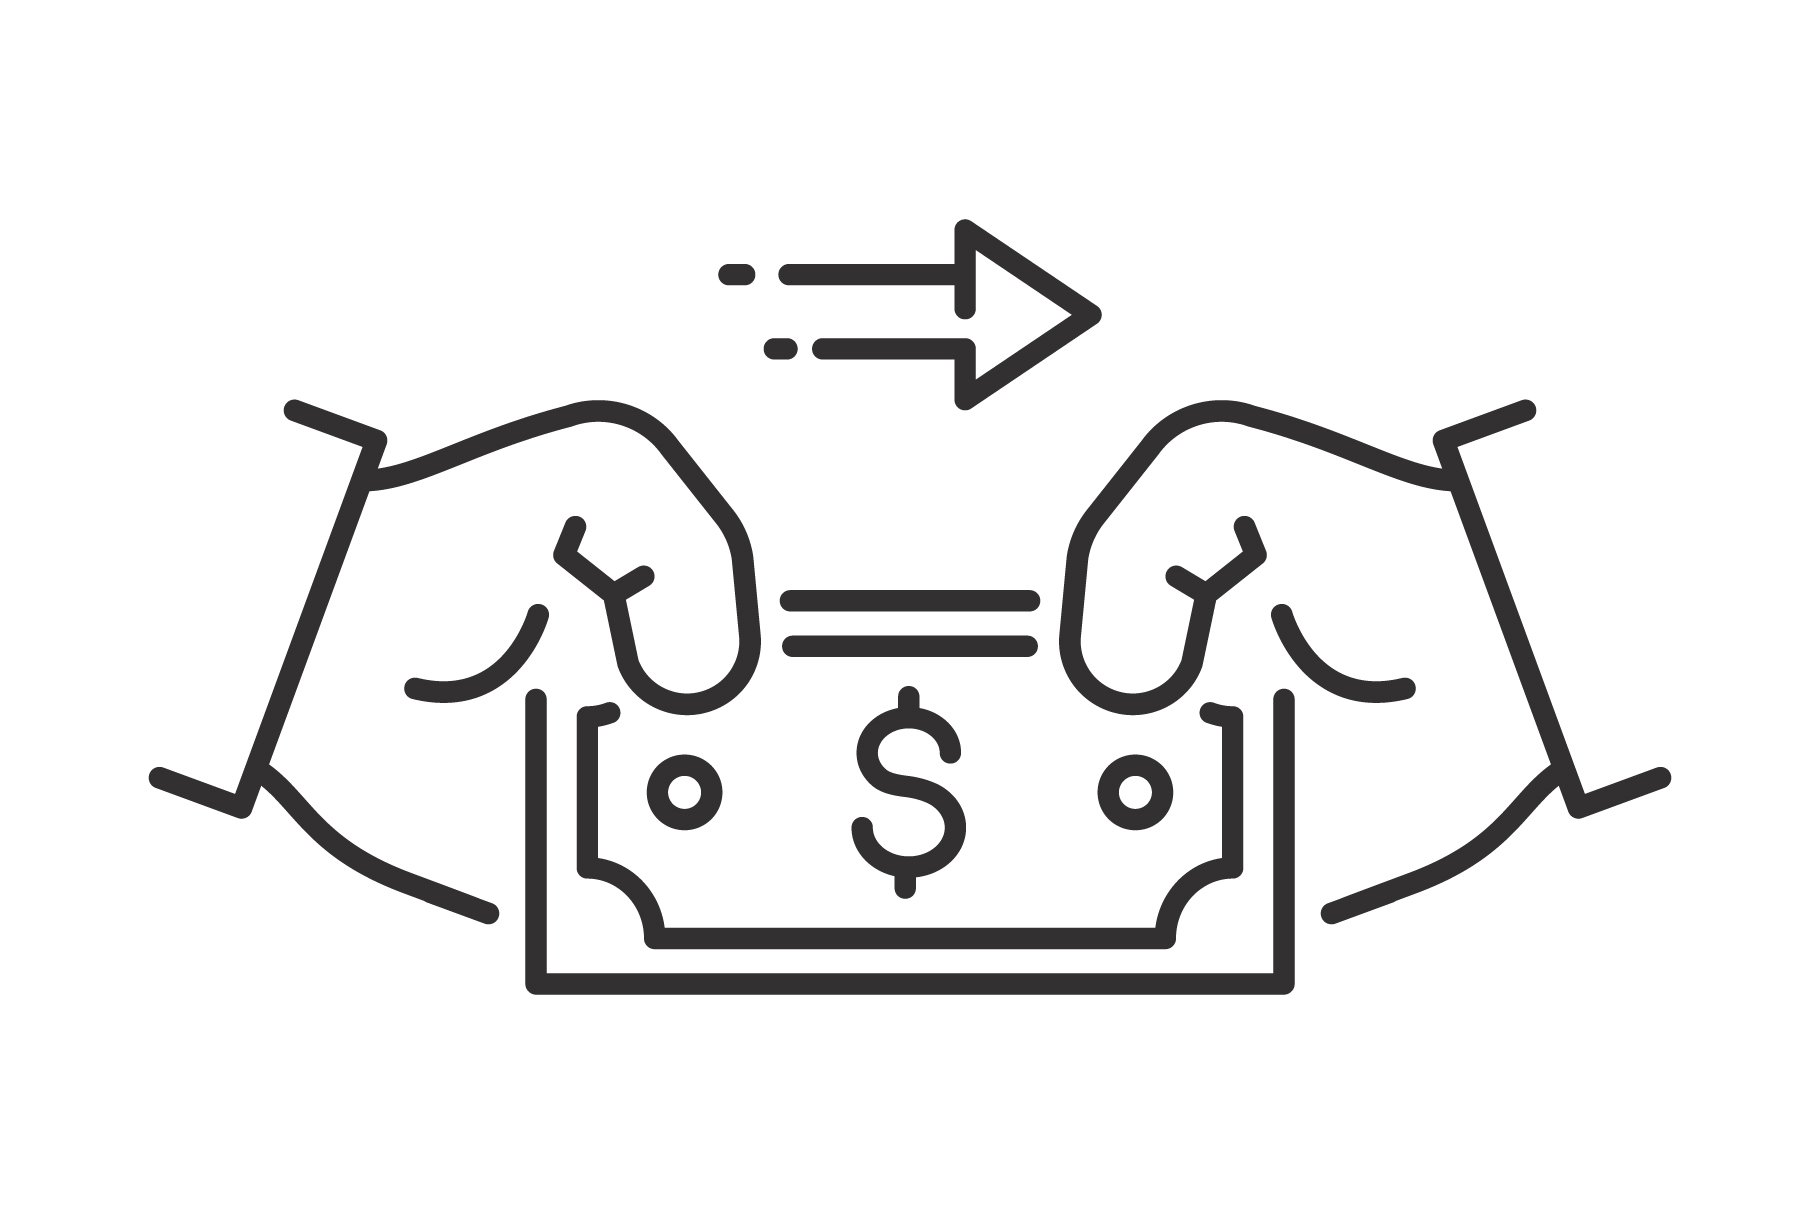 cash pay icon, get or exchange money cover image.